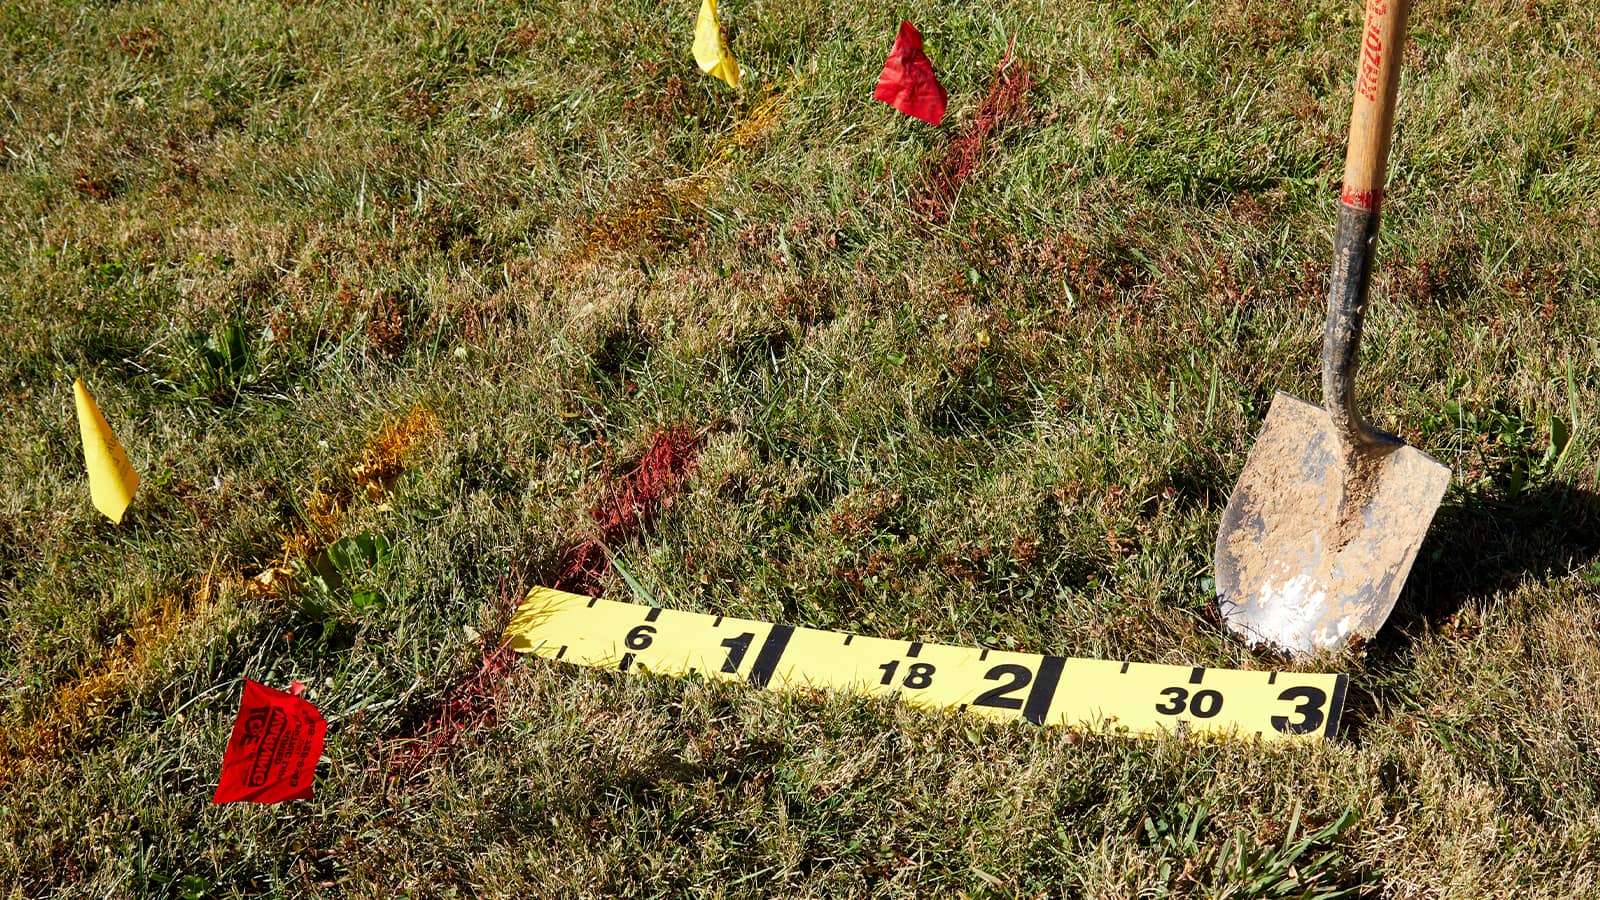 line marking flags and a shovel on a grass yard